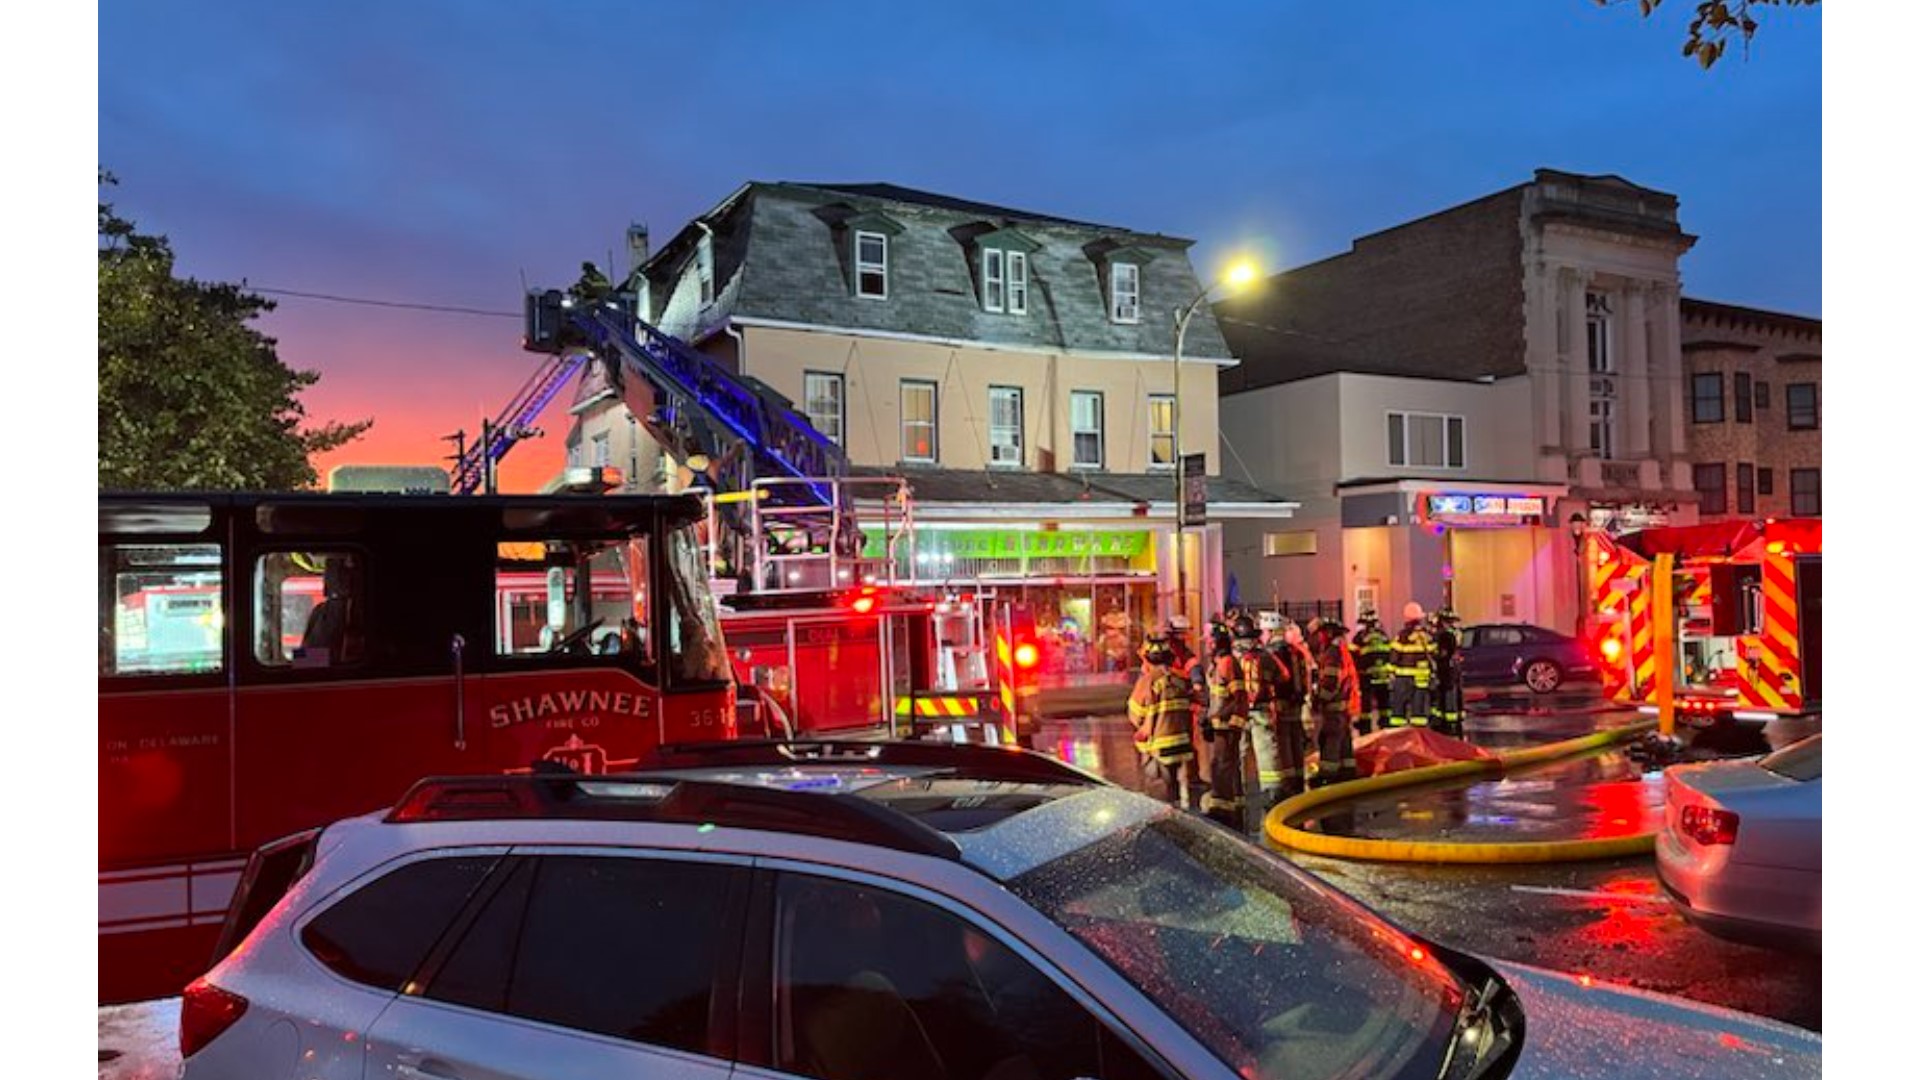 Multiple fire stations were called to assist given the size and age of the building.